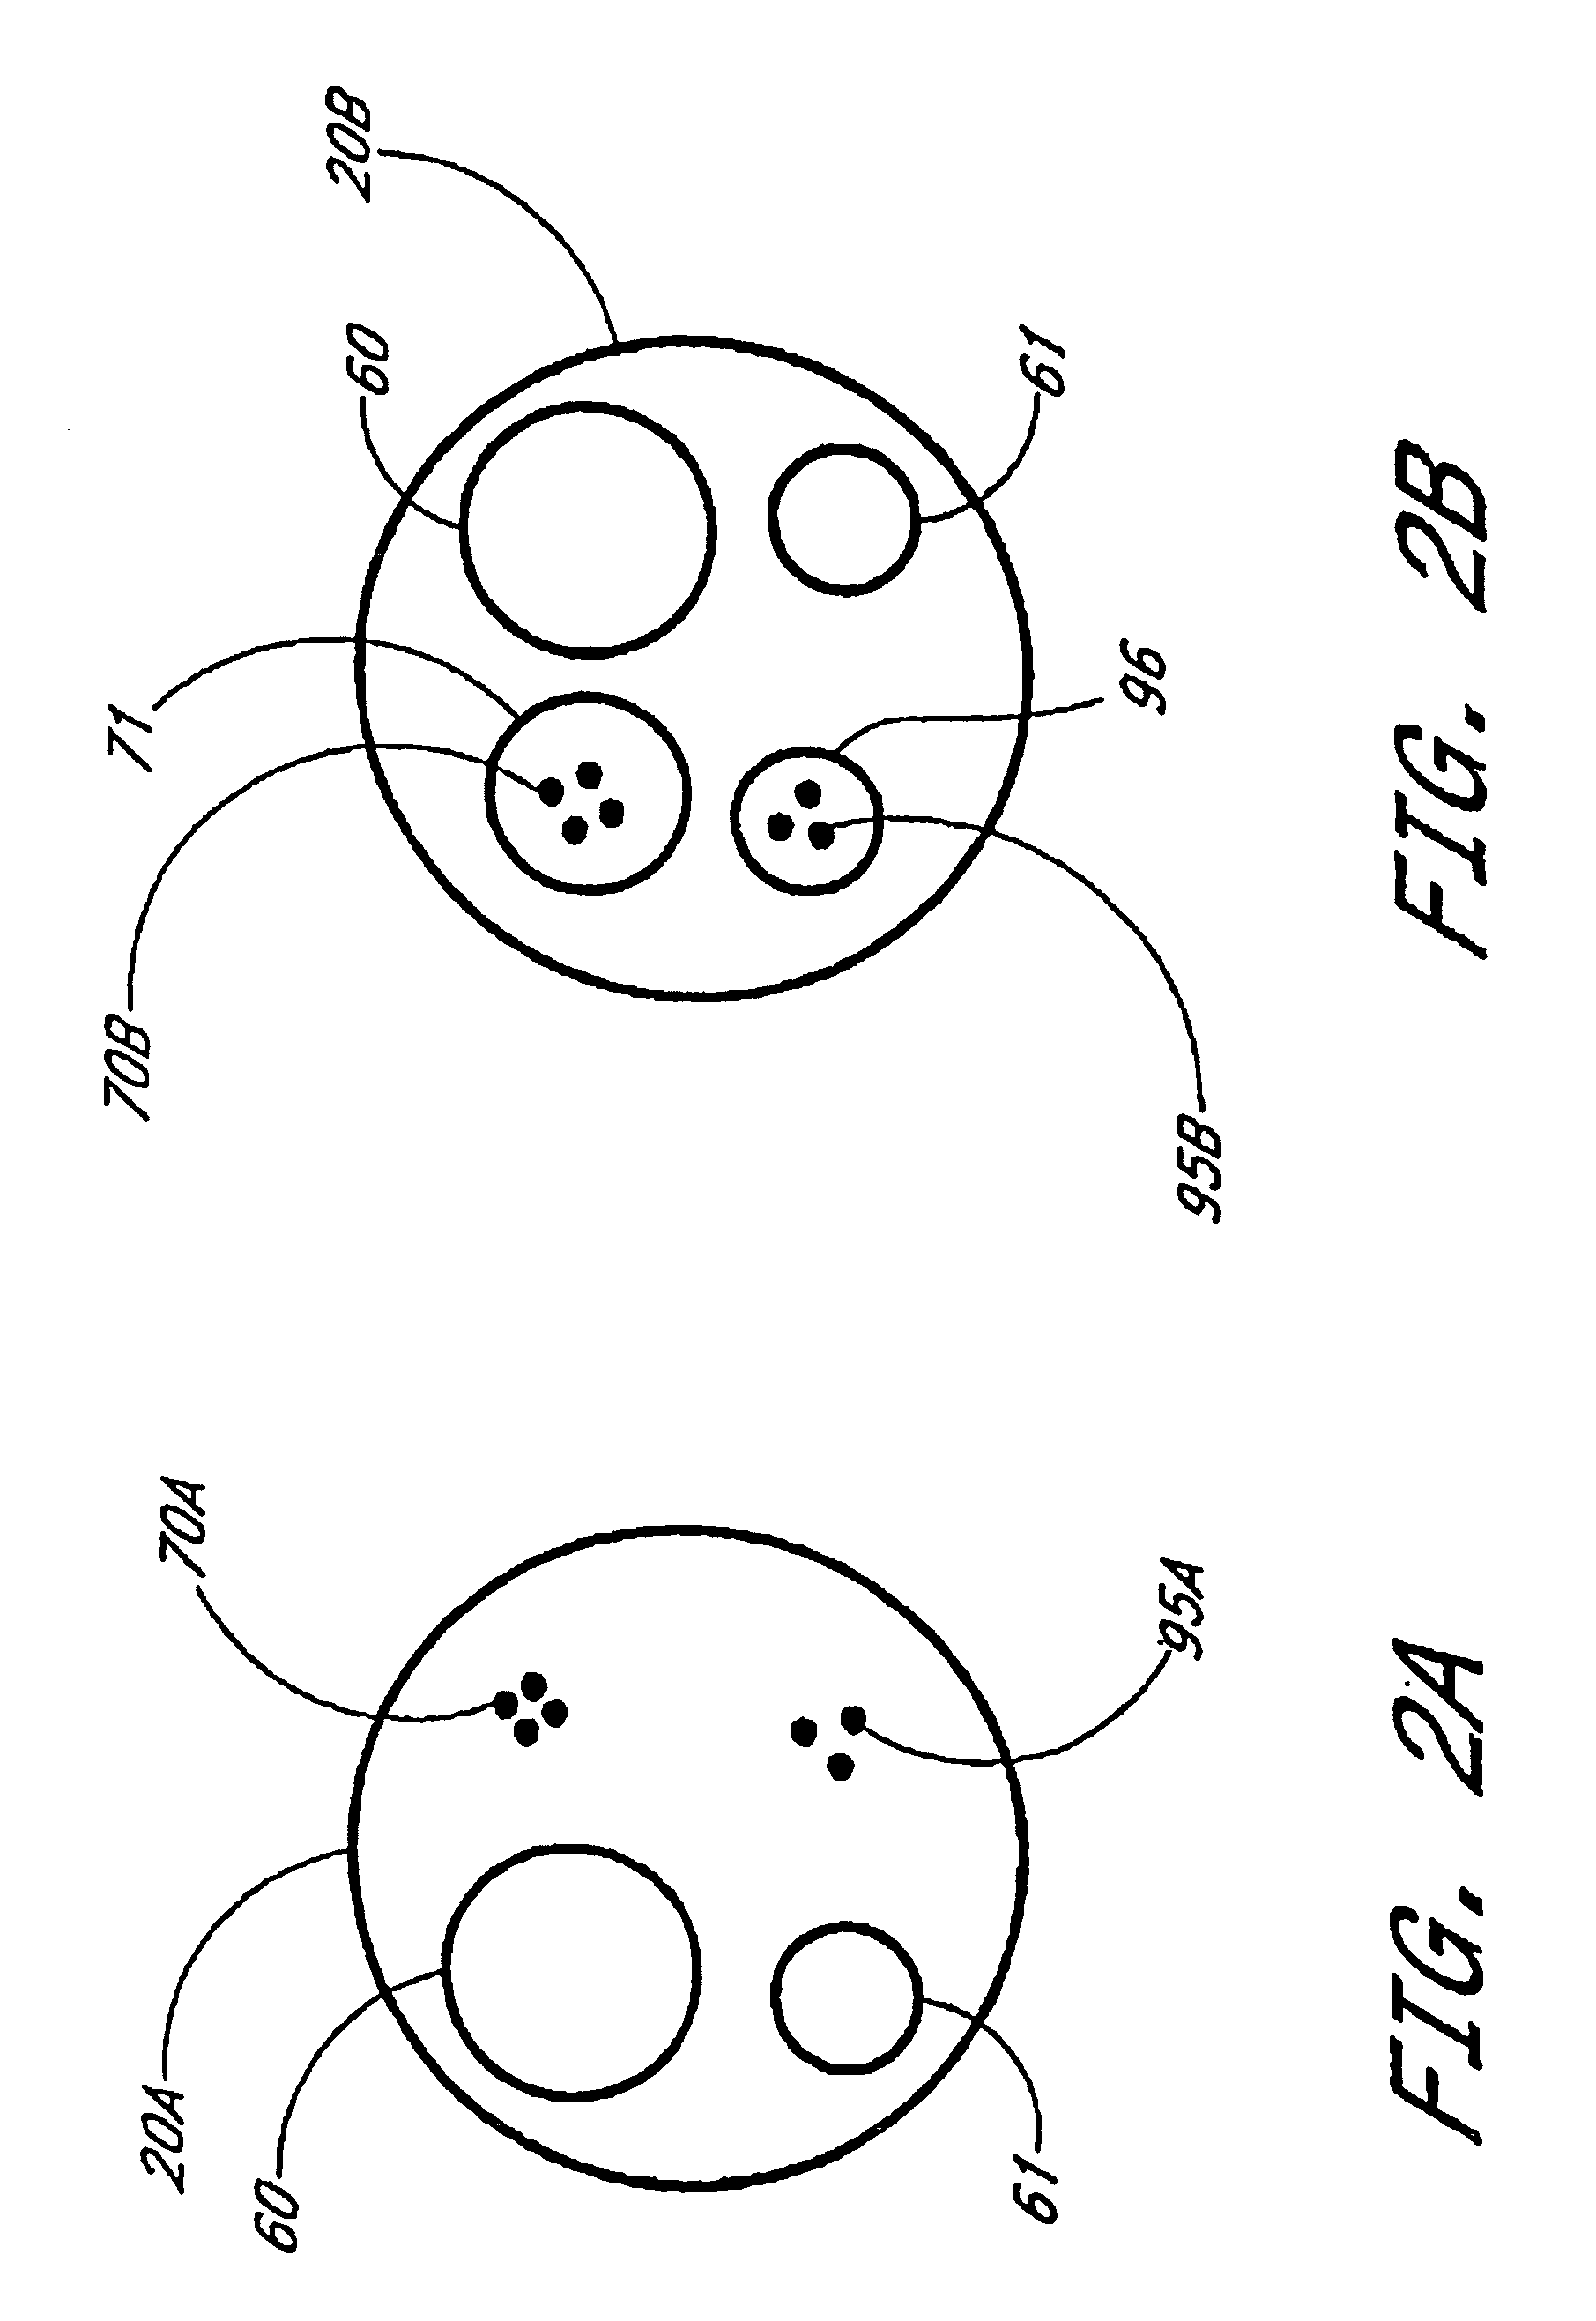 Device, system and method for measuring cross-sectional areas in luminal organs